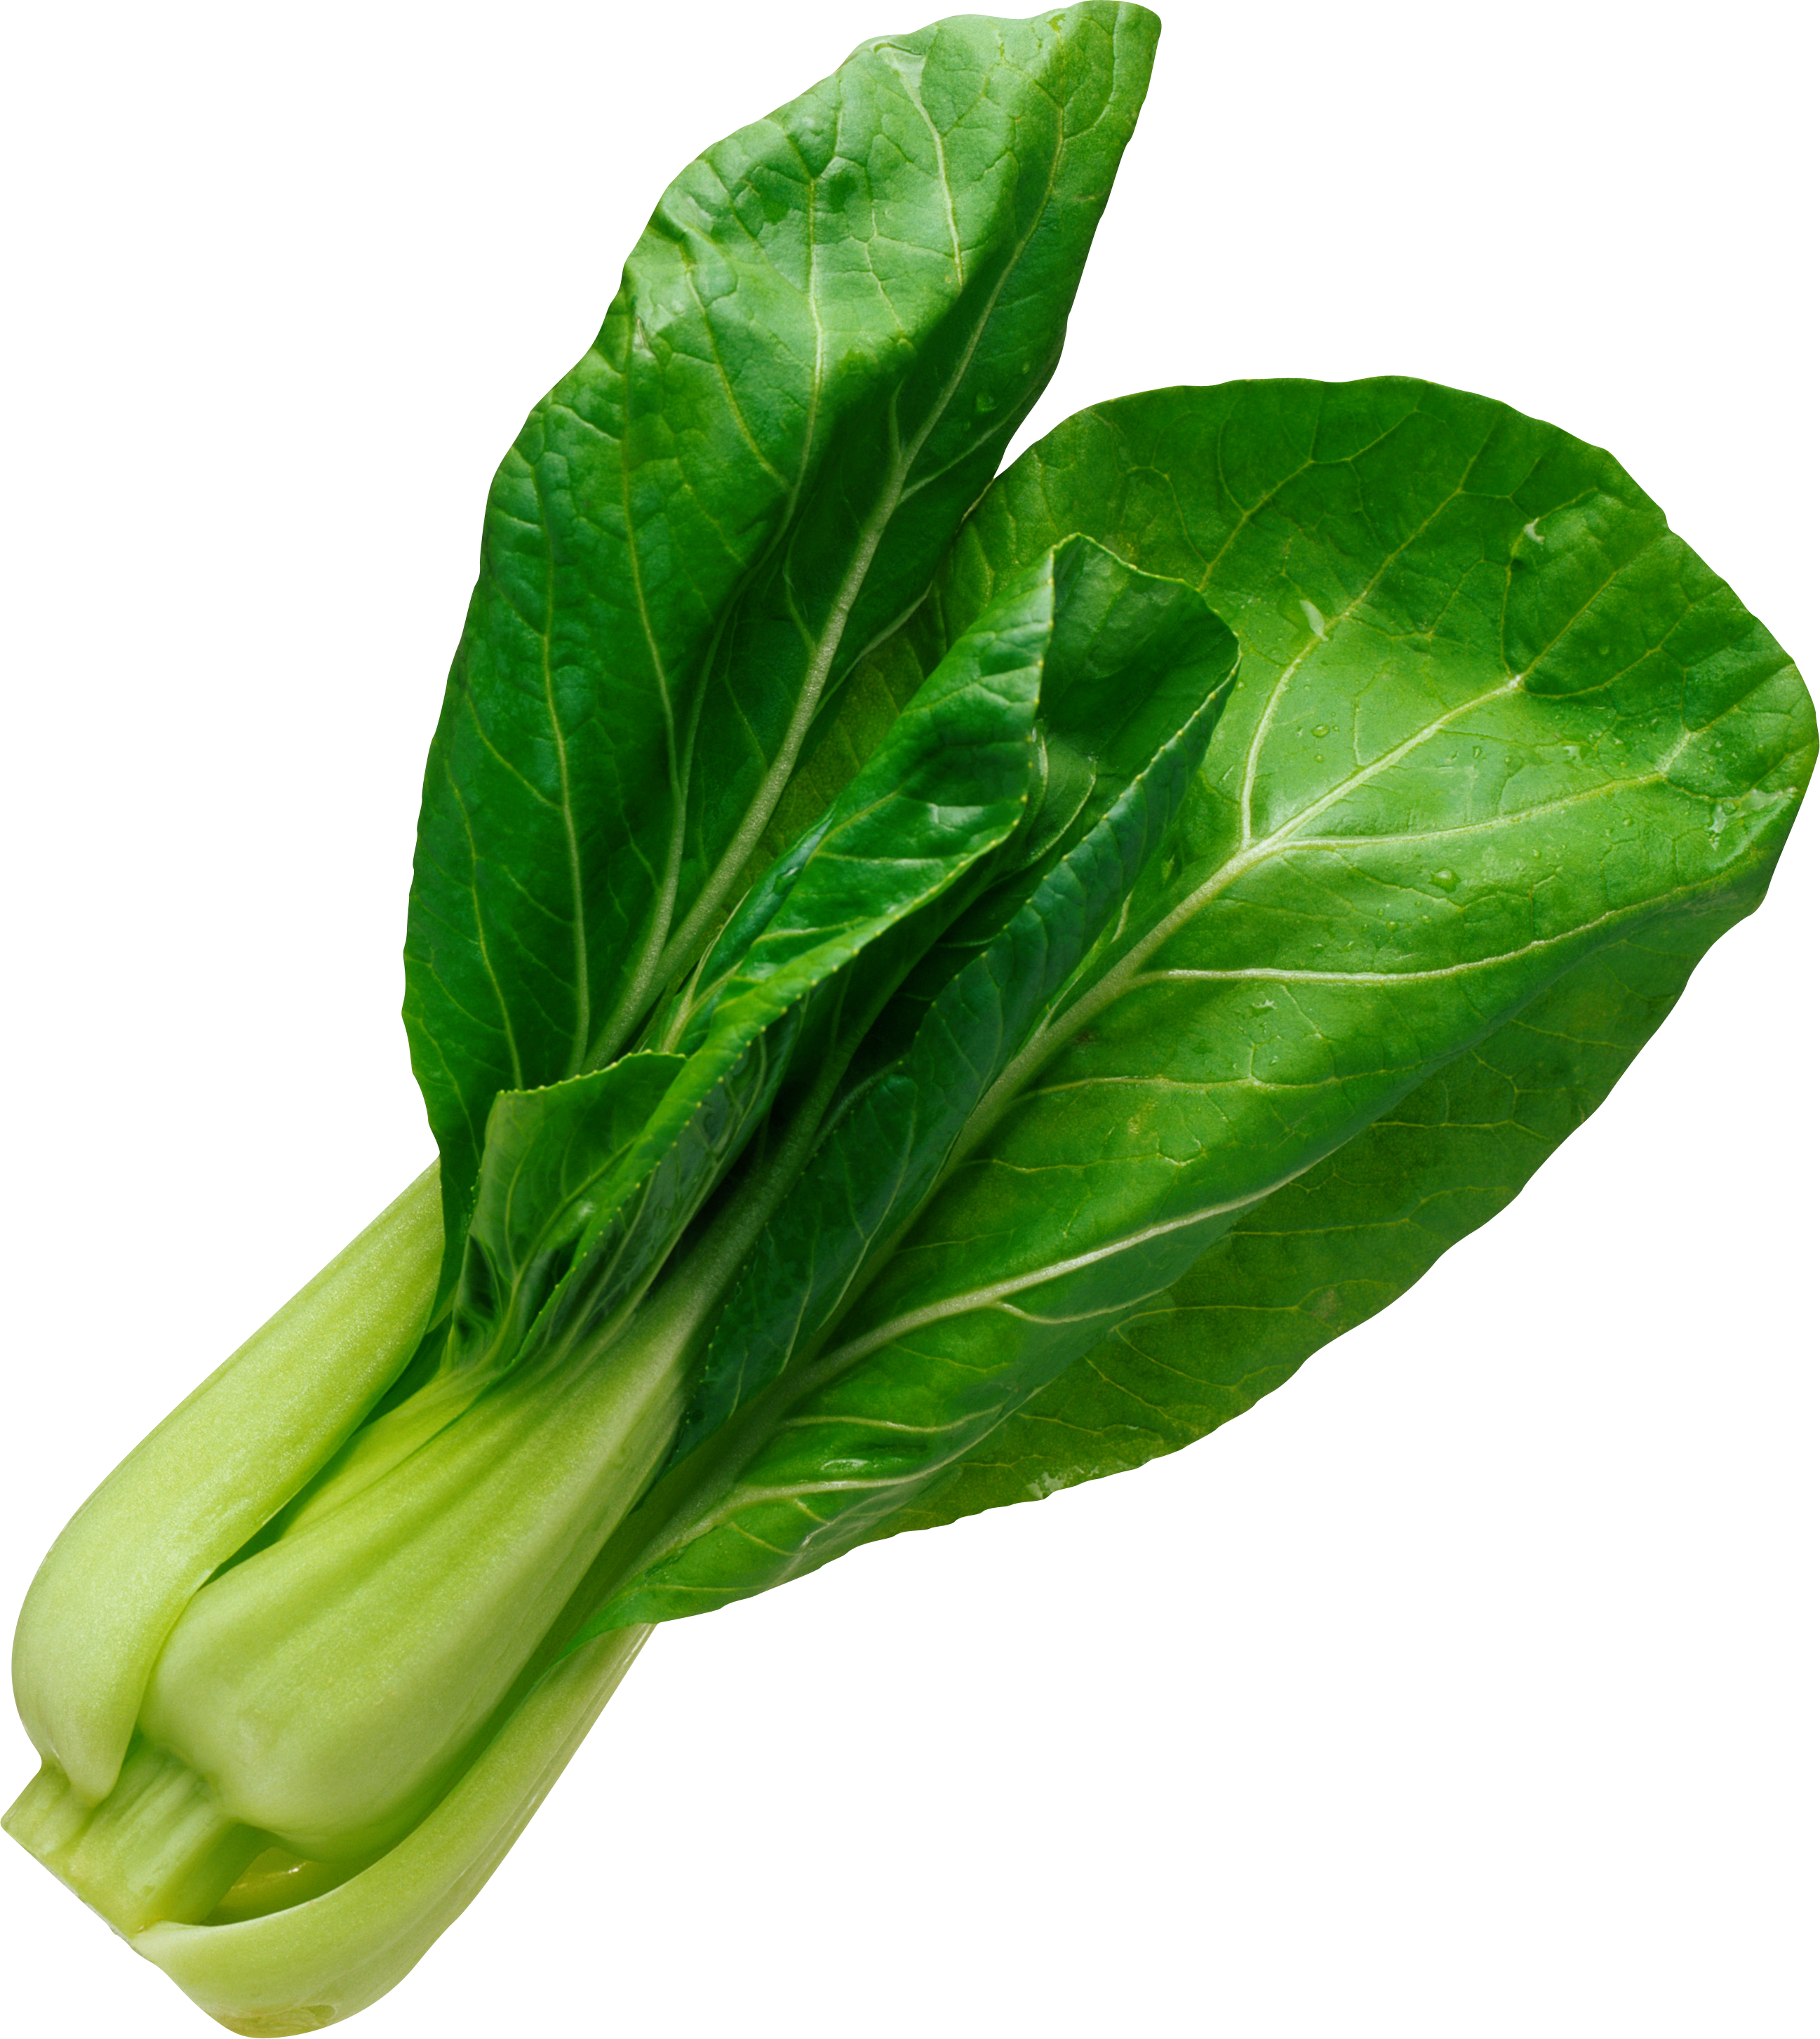 Lettuce clipart spinach. Salad png image purepng